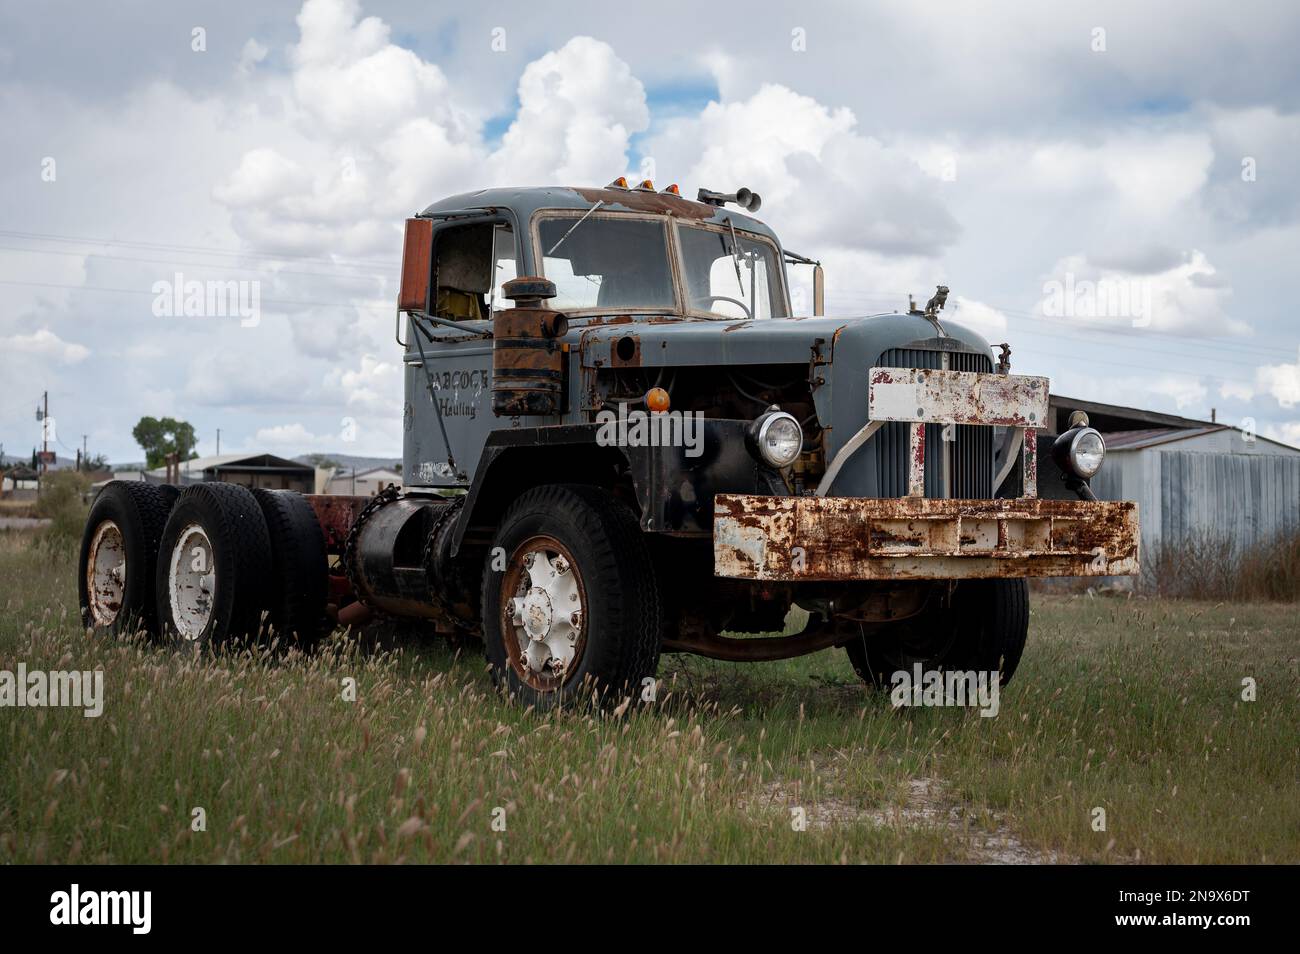 An old Mack truck abandoned in the field Stock Photo